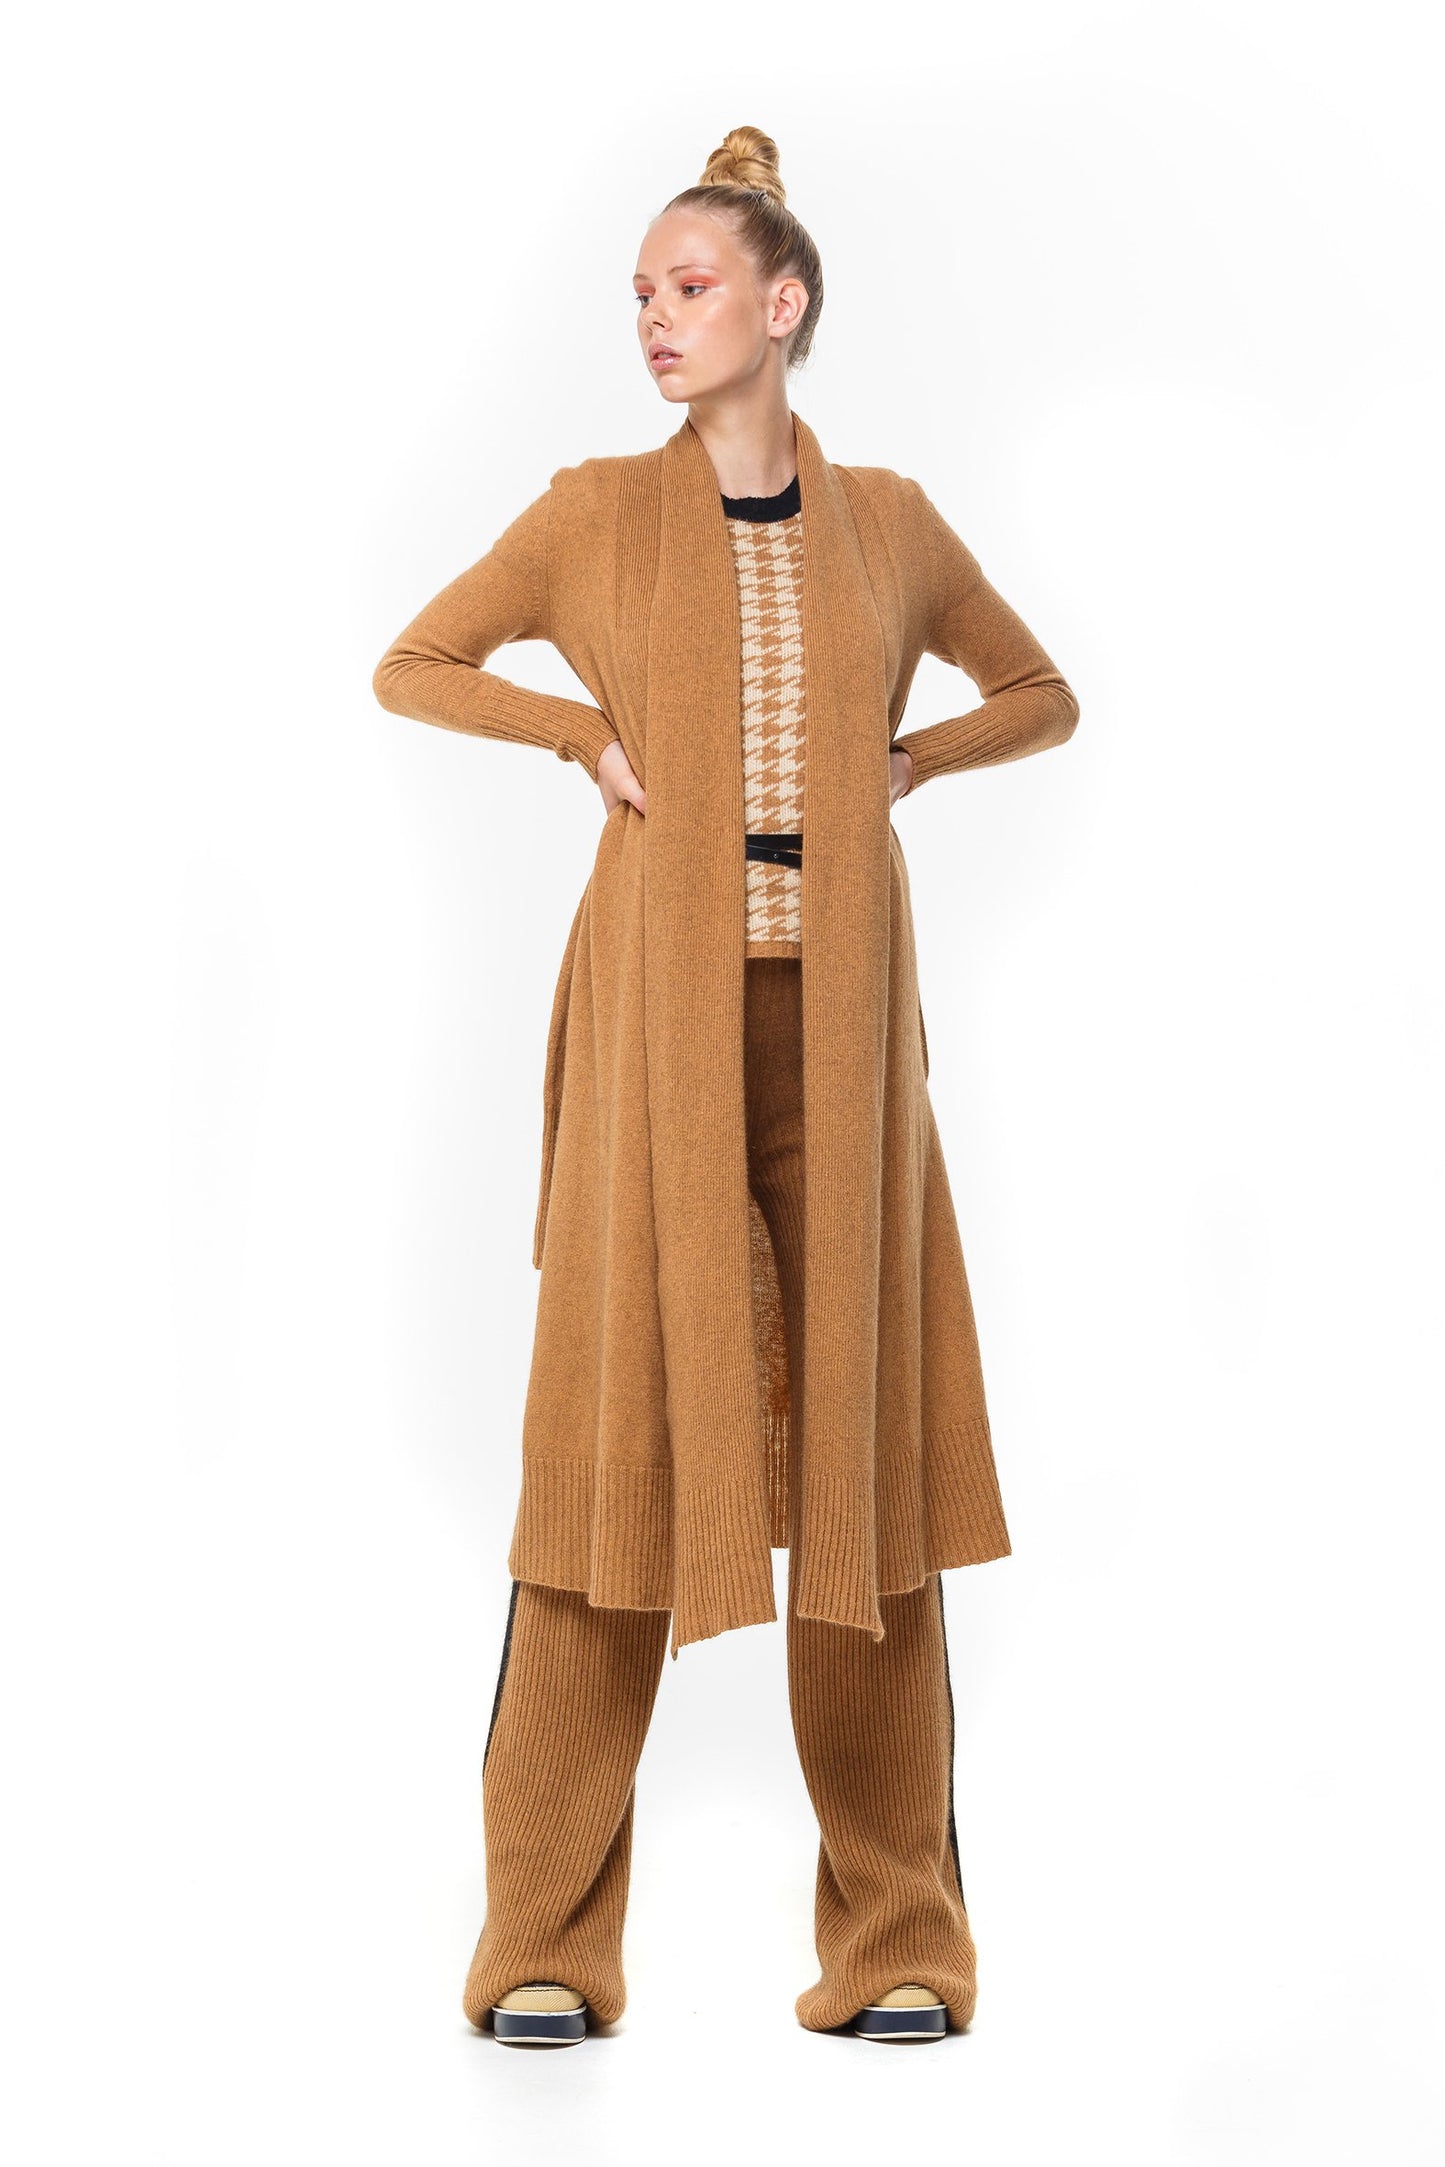 LONG CARDY - Woolshed Gallery